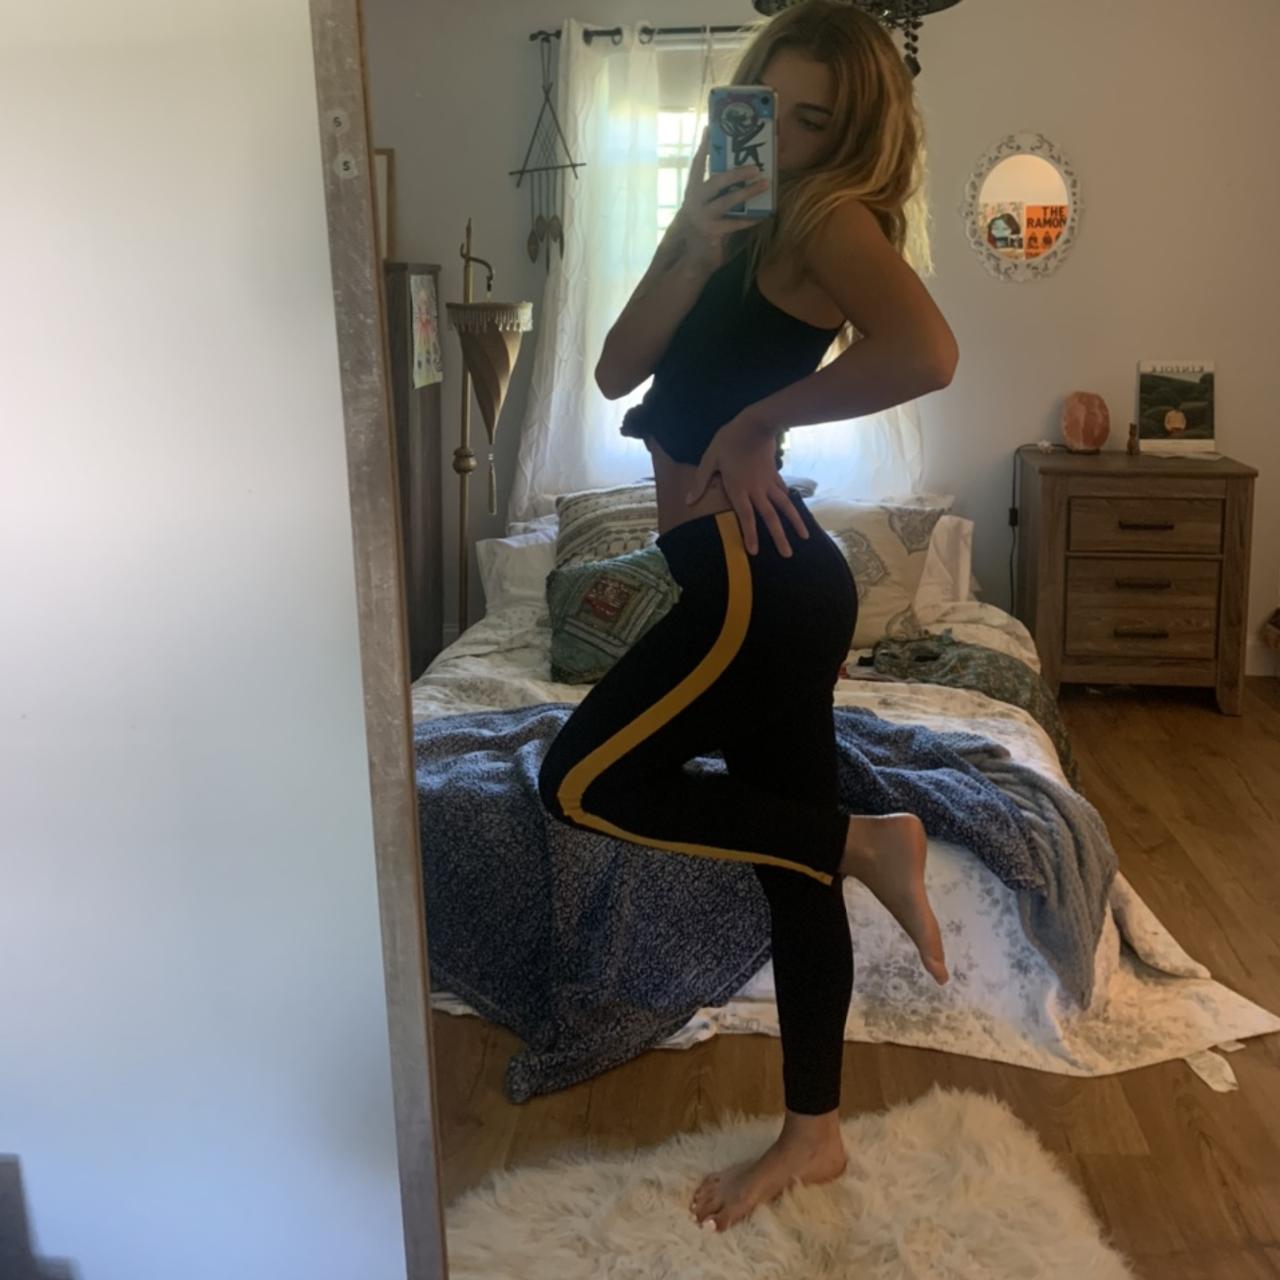 SMALL H&M LEGGINGS with yellow/gold stripe down - Depop